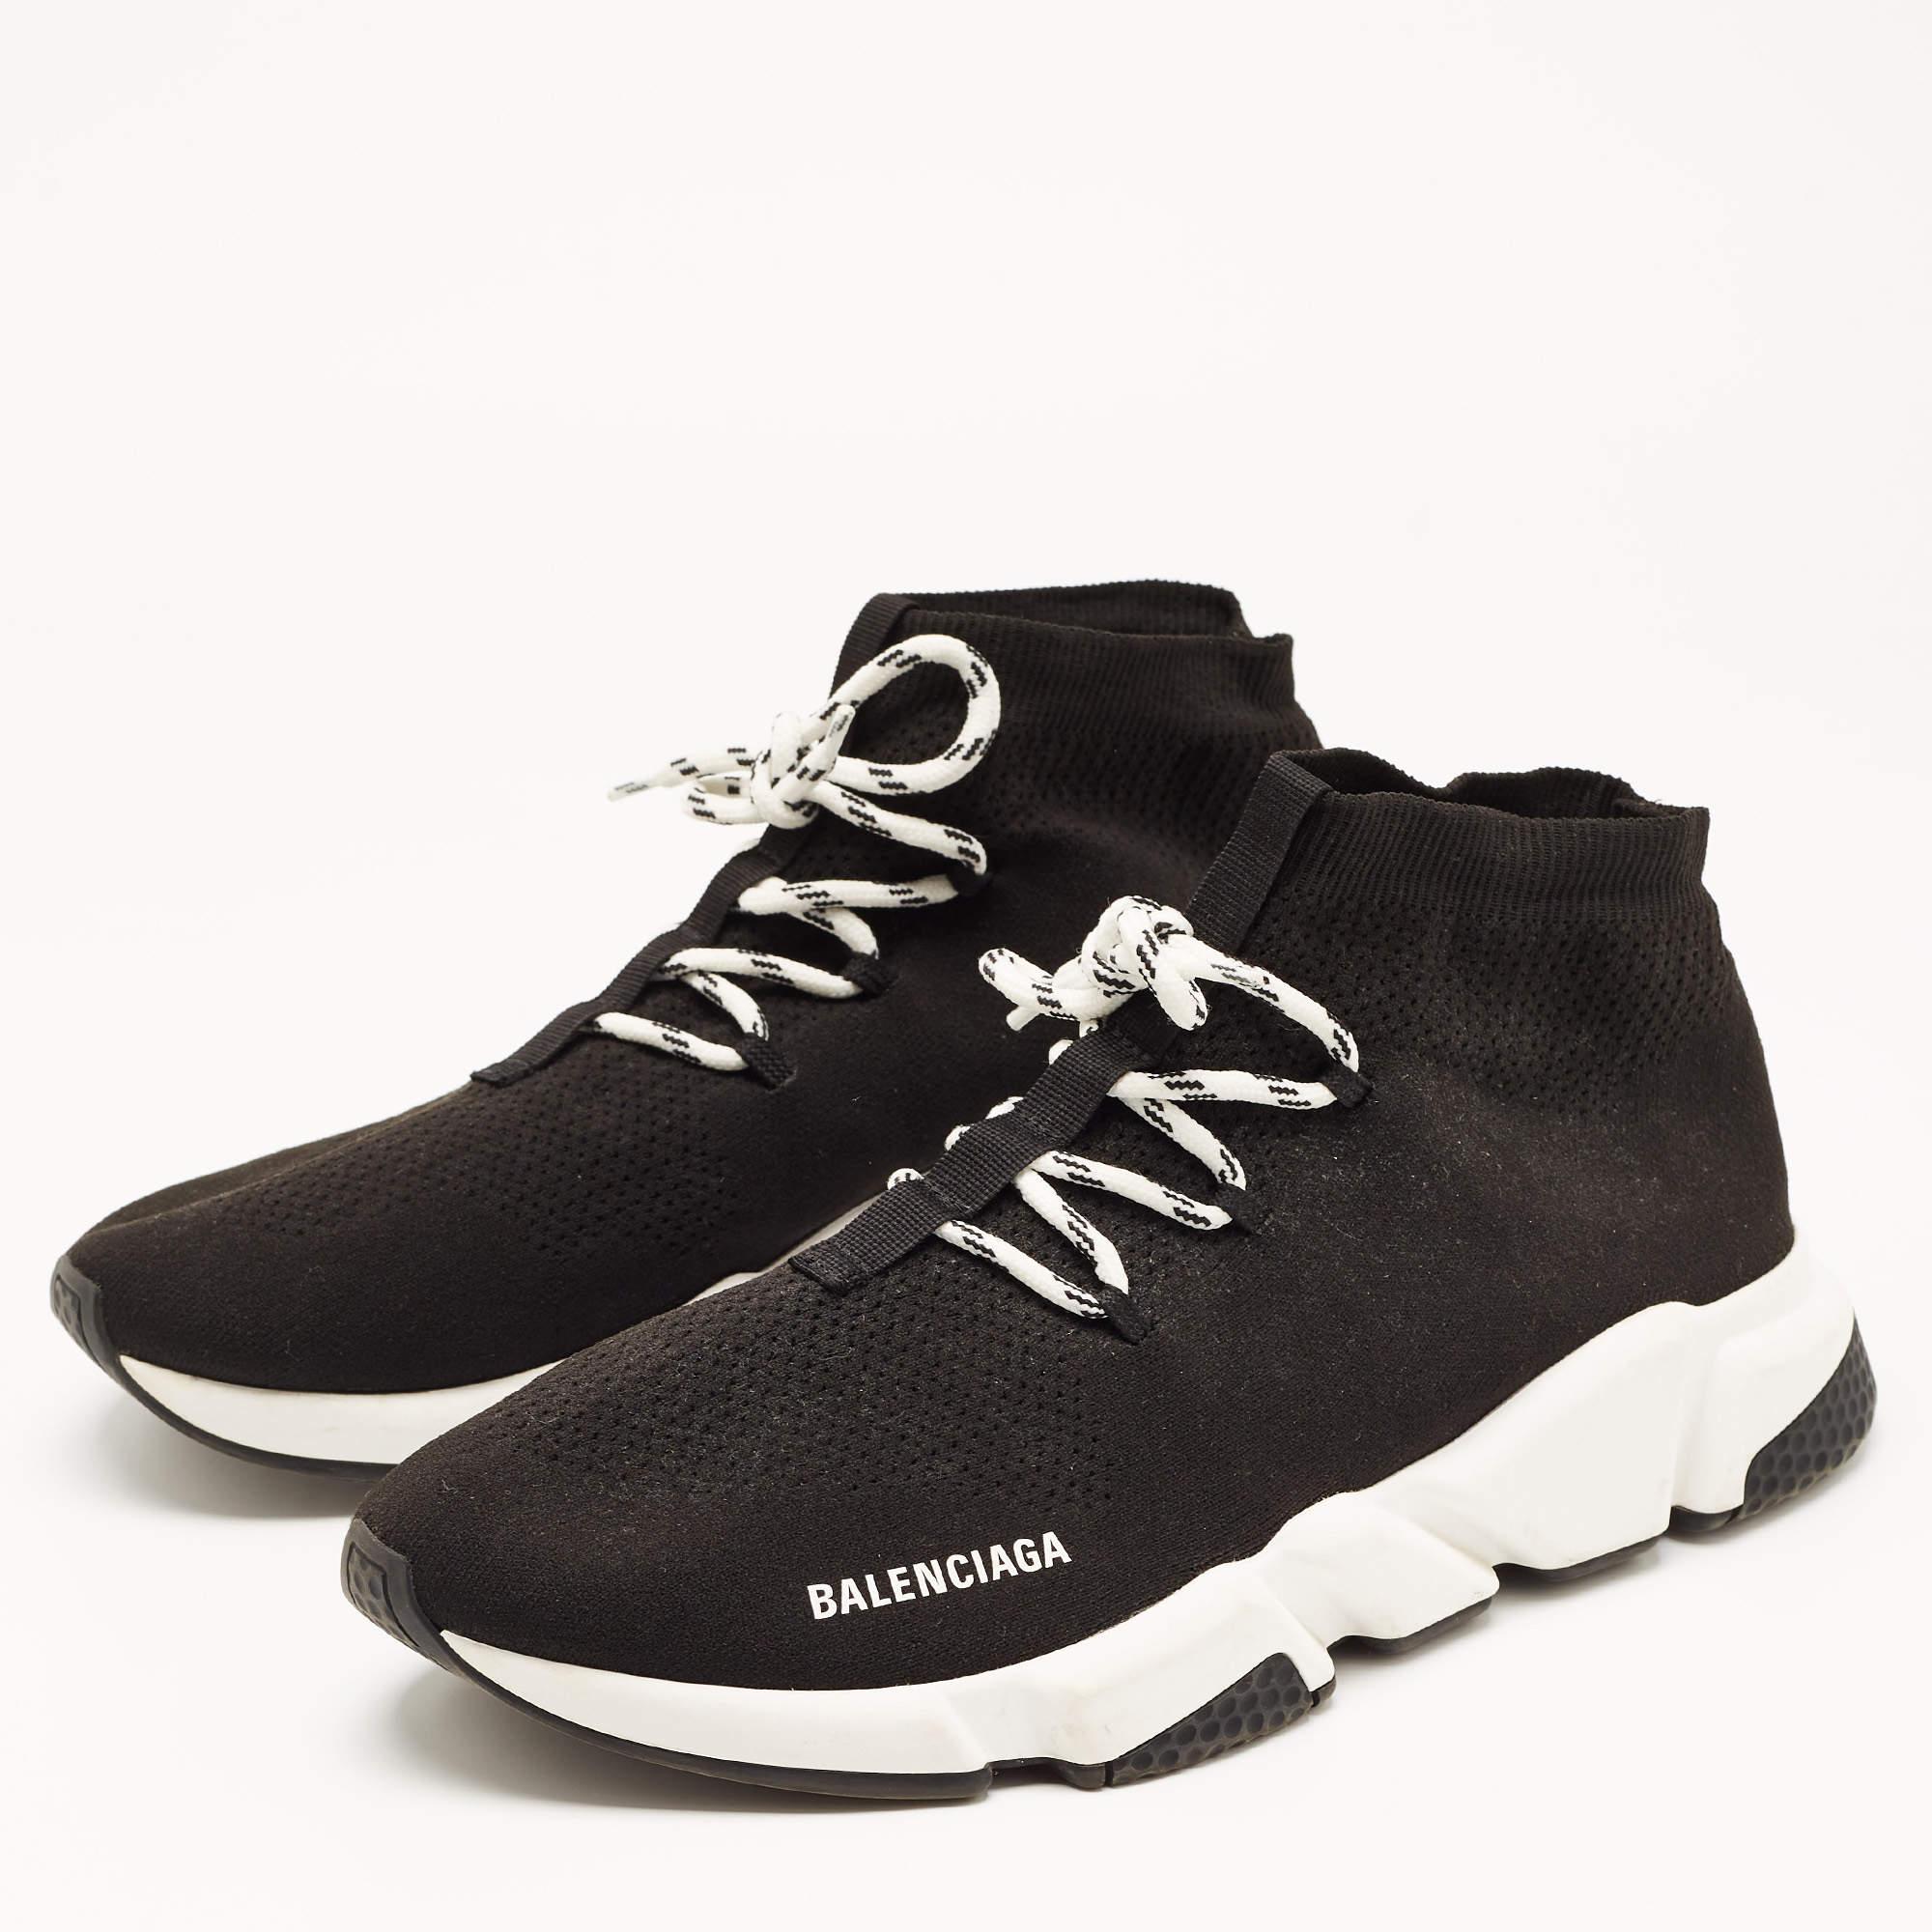 Let your latest shoe addition be this pair of sneakers from Balenciaga. They've been crafted from fine materials and styled with comfortable insoles.

